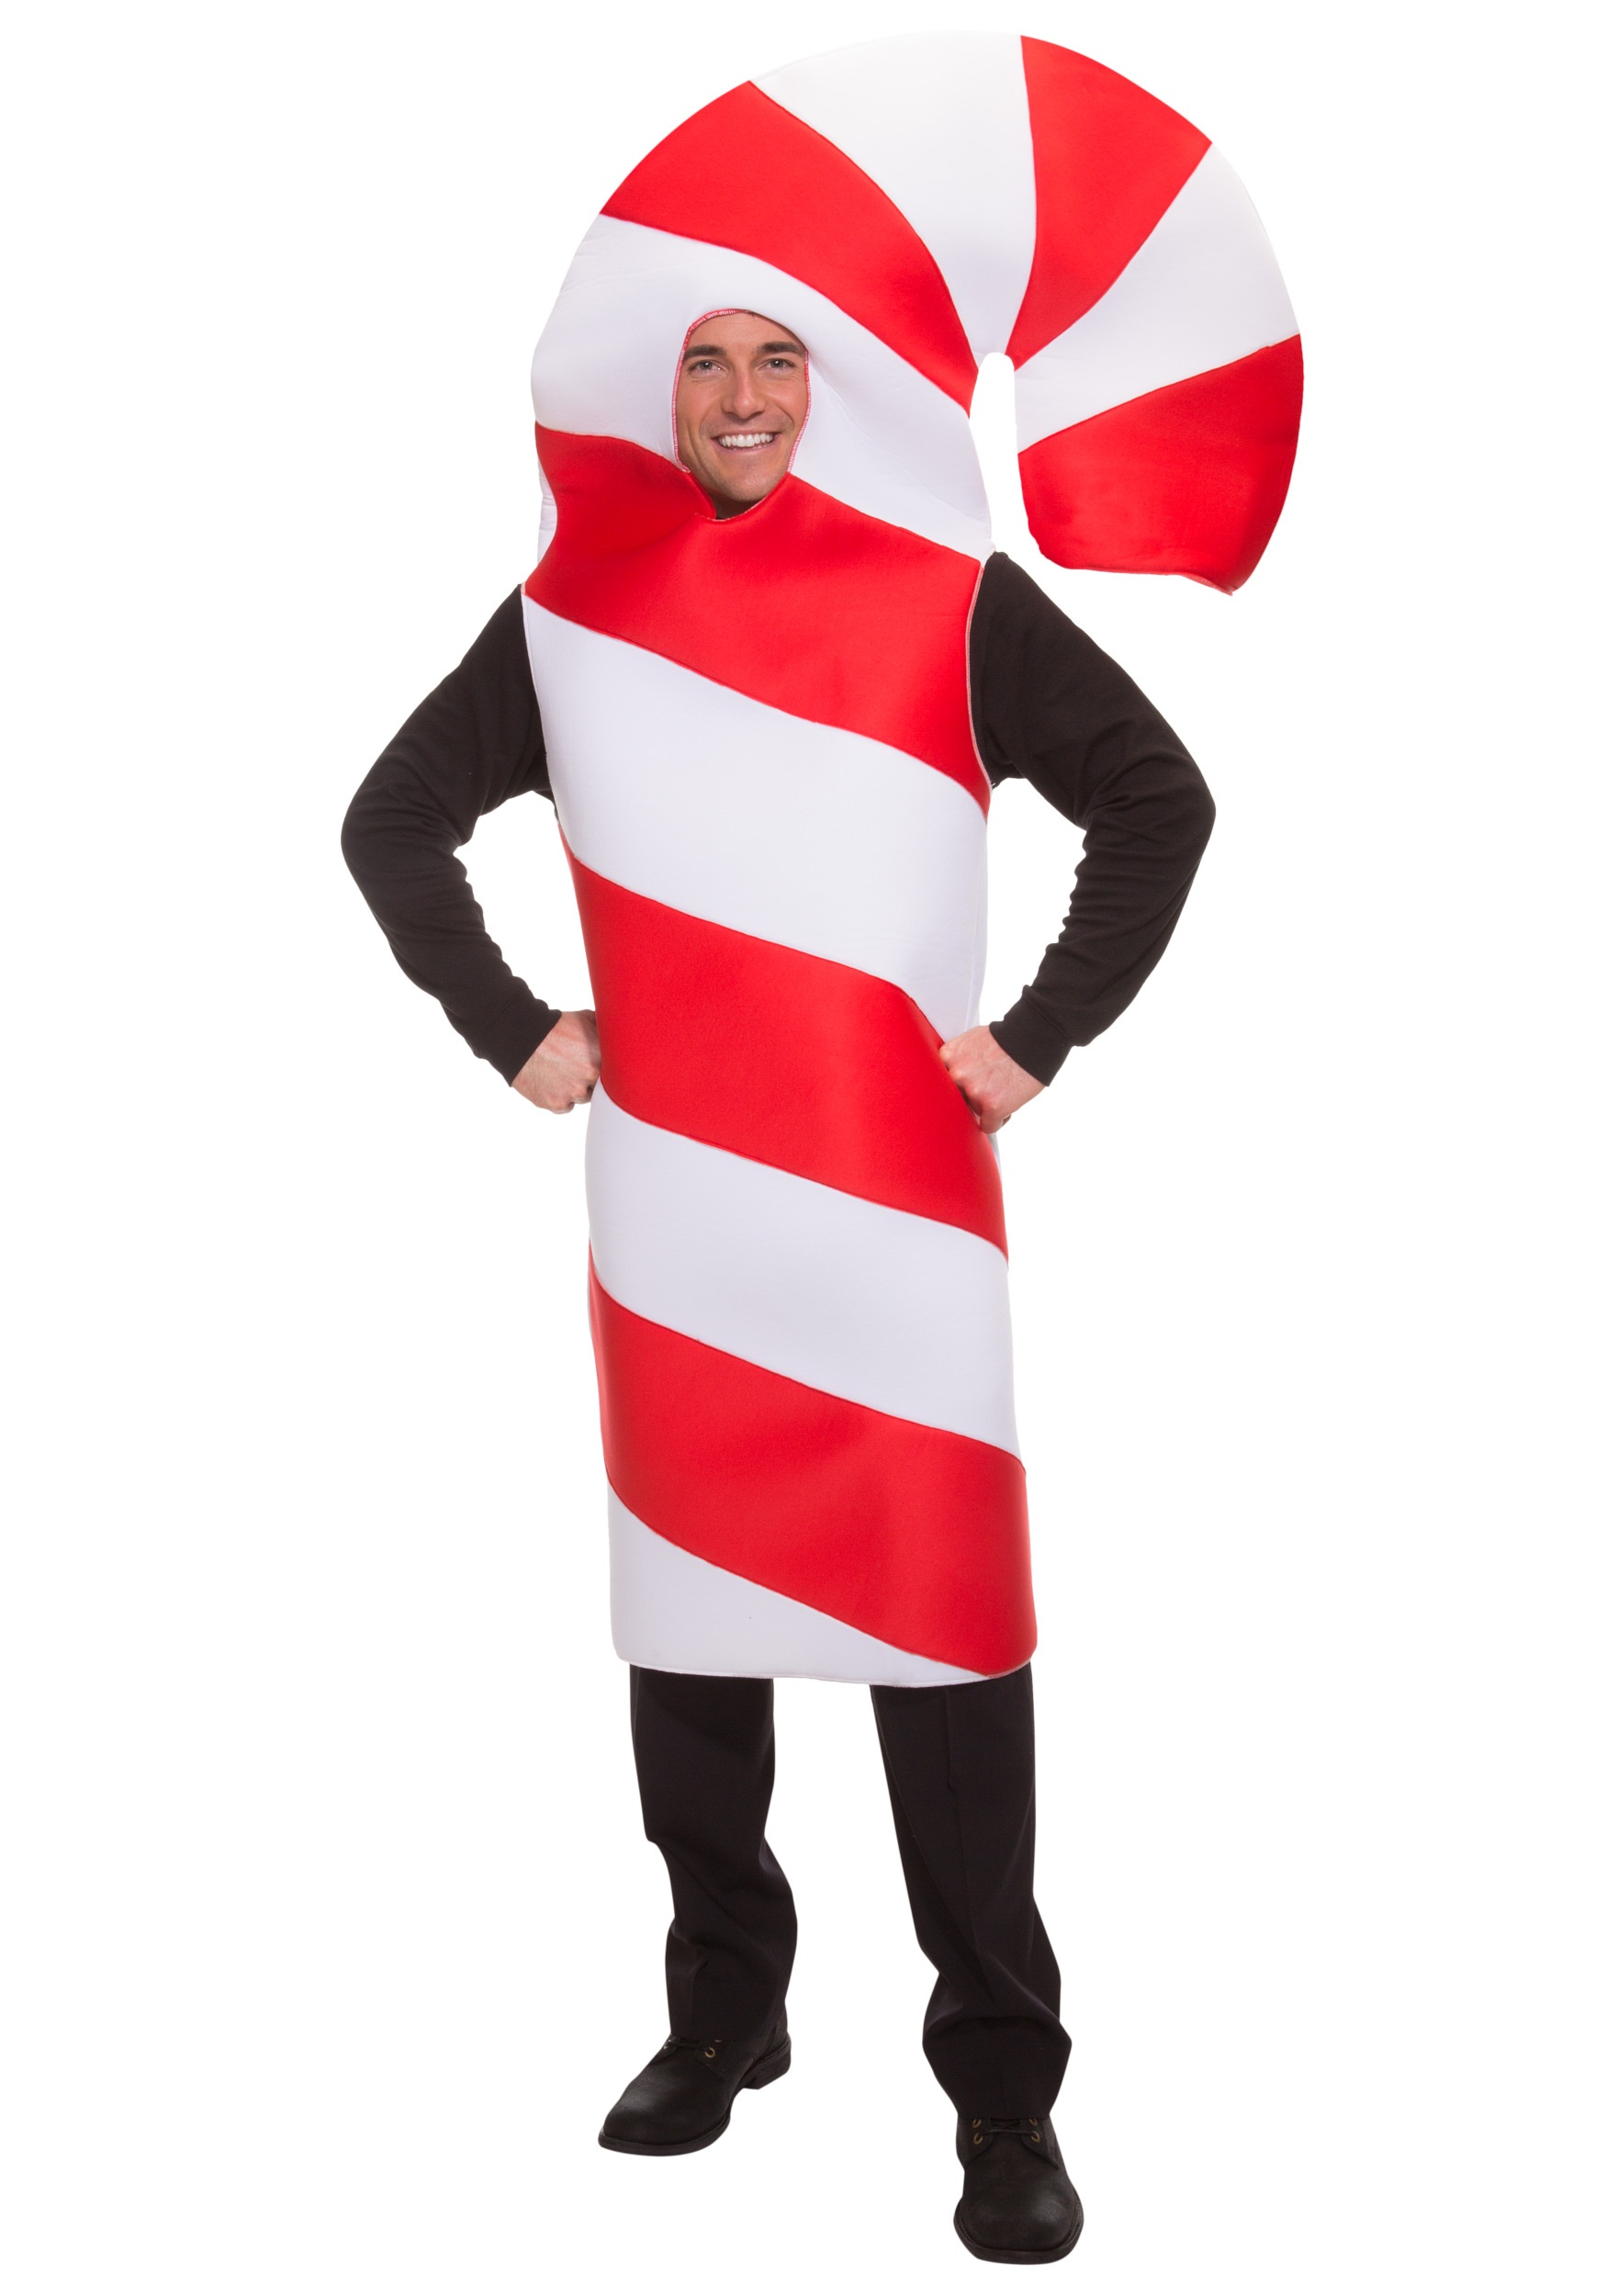 https://images.halloweencostumes.ca/products/17344/1-1/adult-candy-cane-costume.jpg